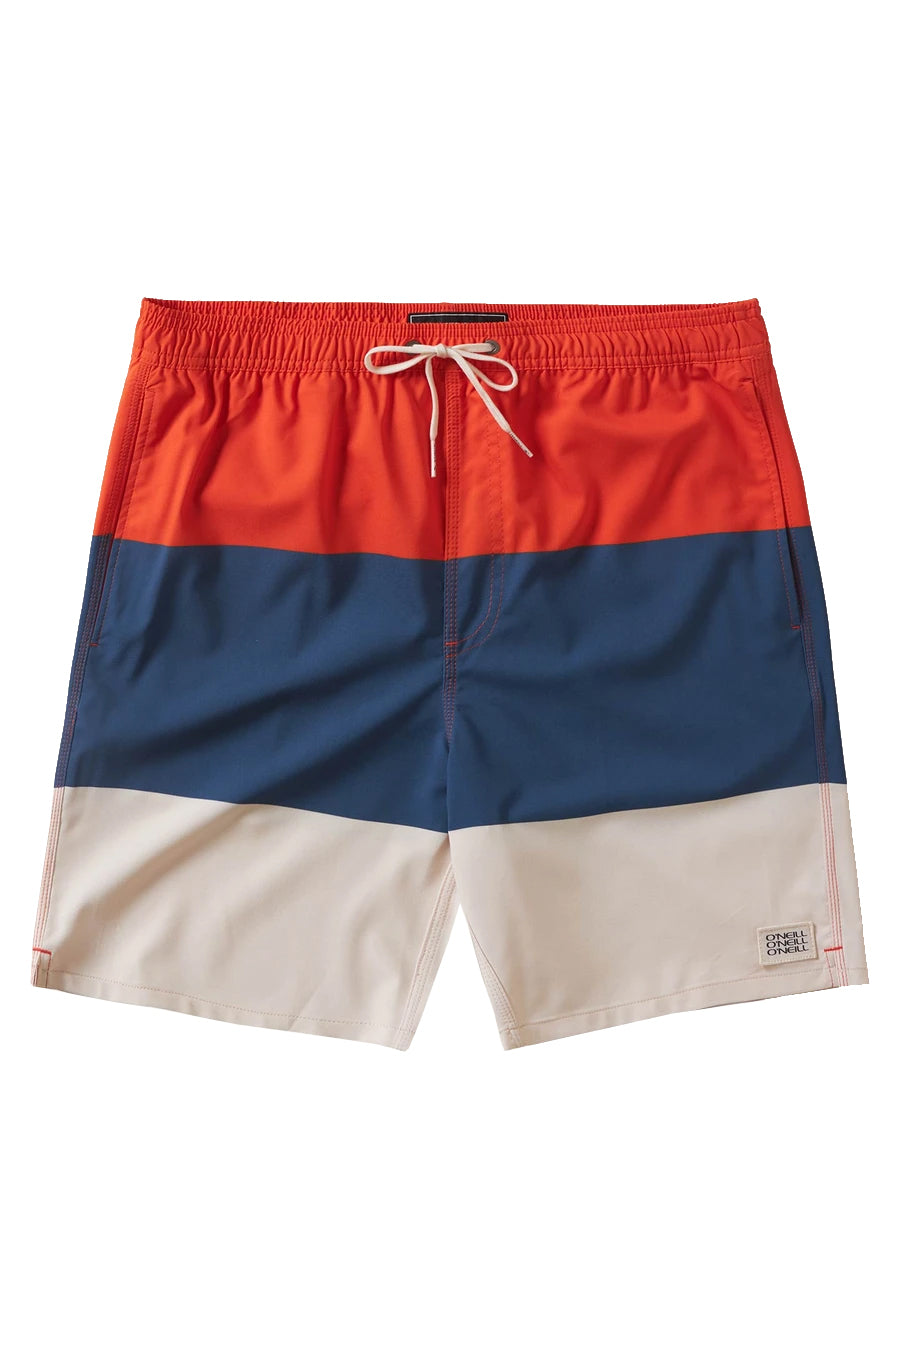 O'neill Mixed Up 17" Volley Boardshorts TANG-Tangerine S